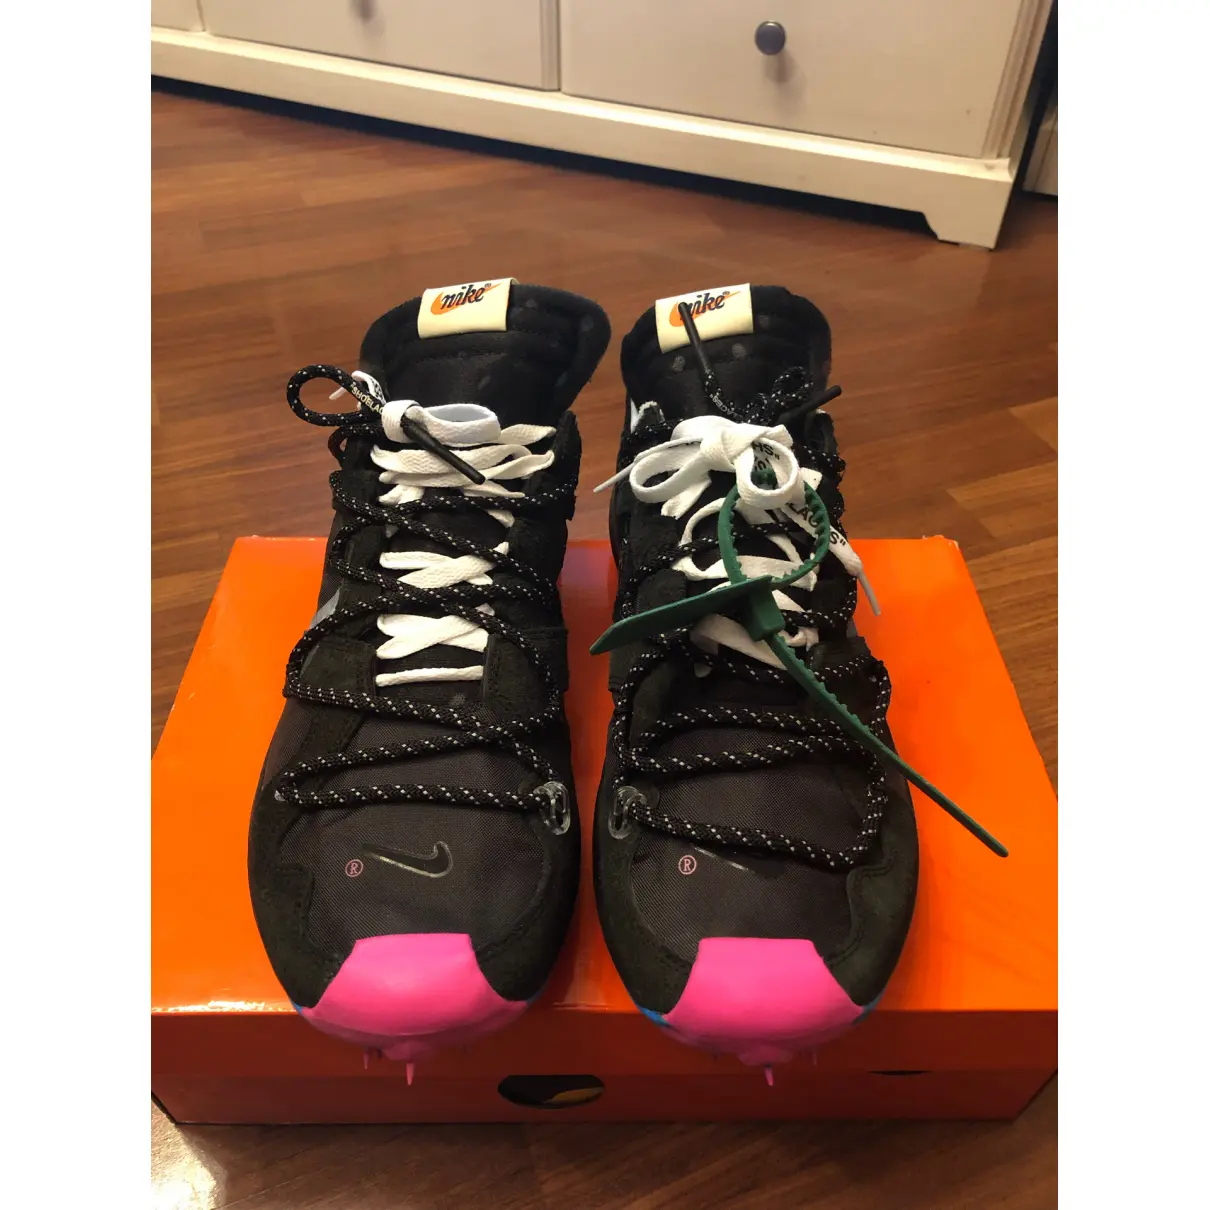 Buy Nike x Off-White Zoom Terra Kiger 5 low trainers online